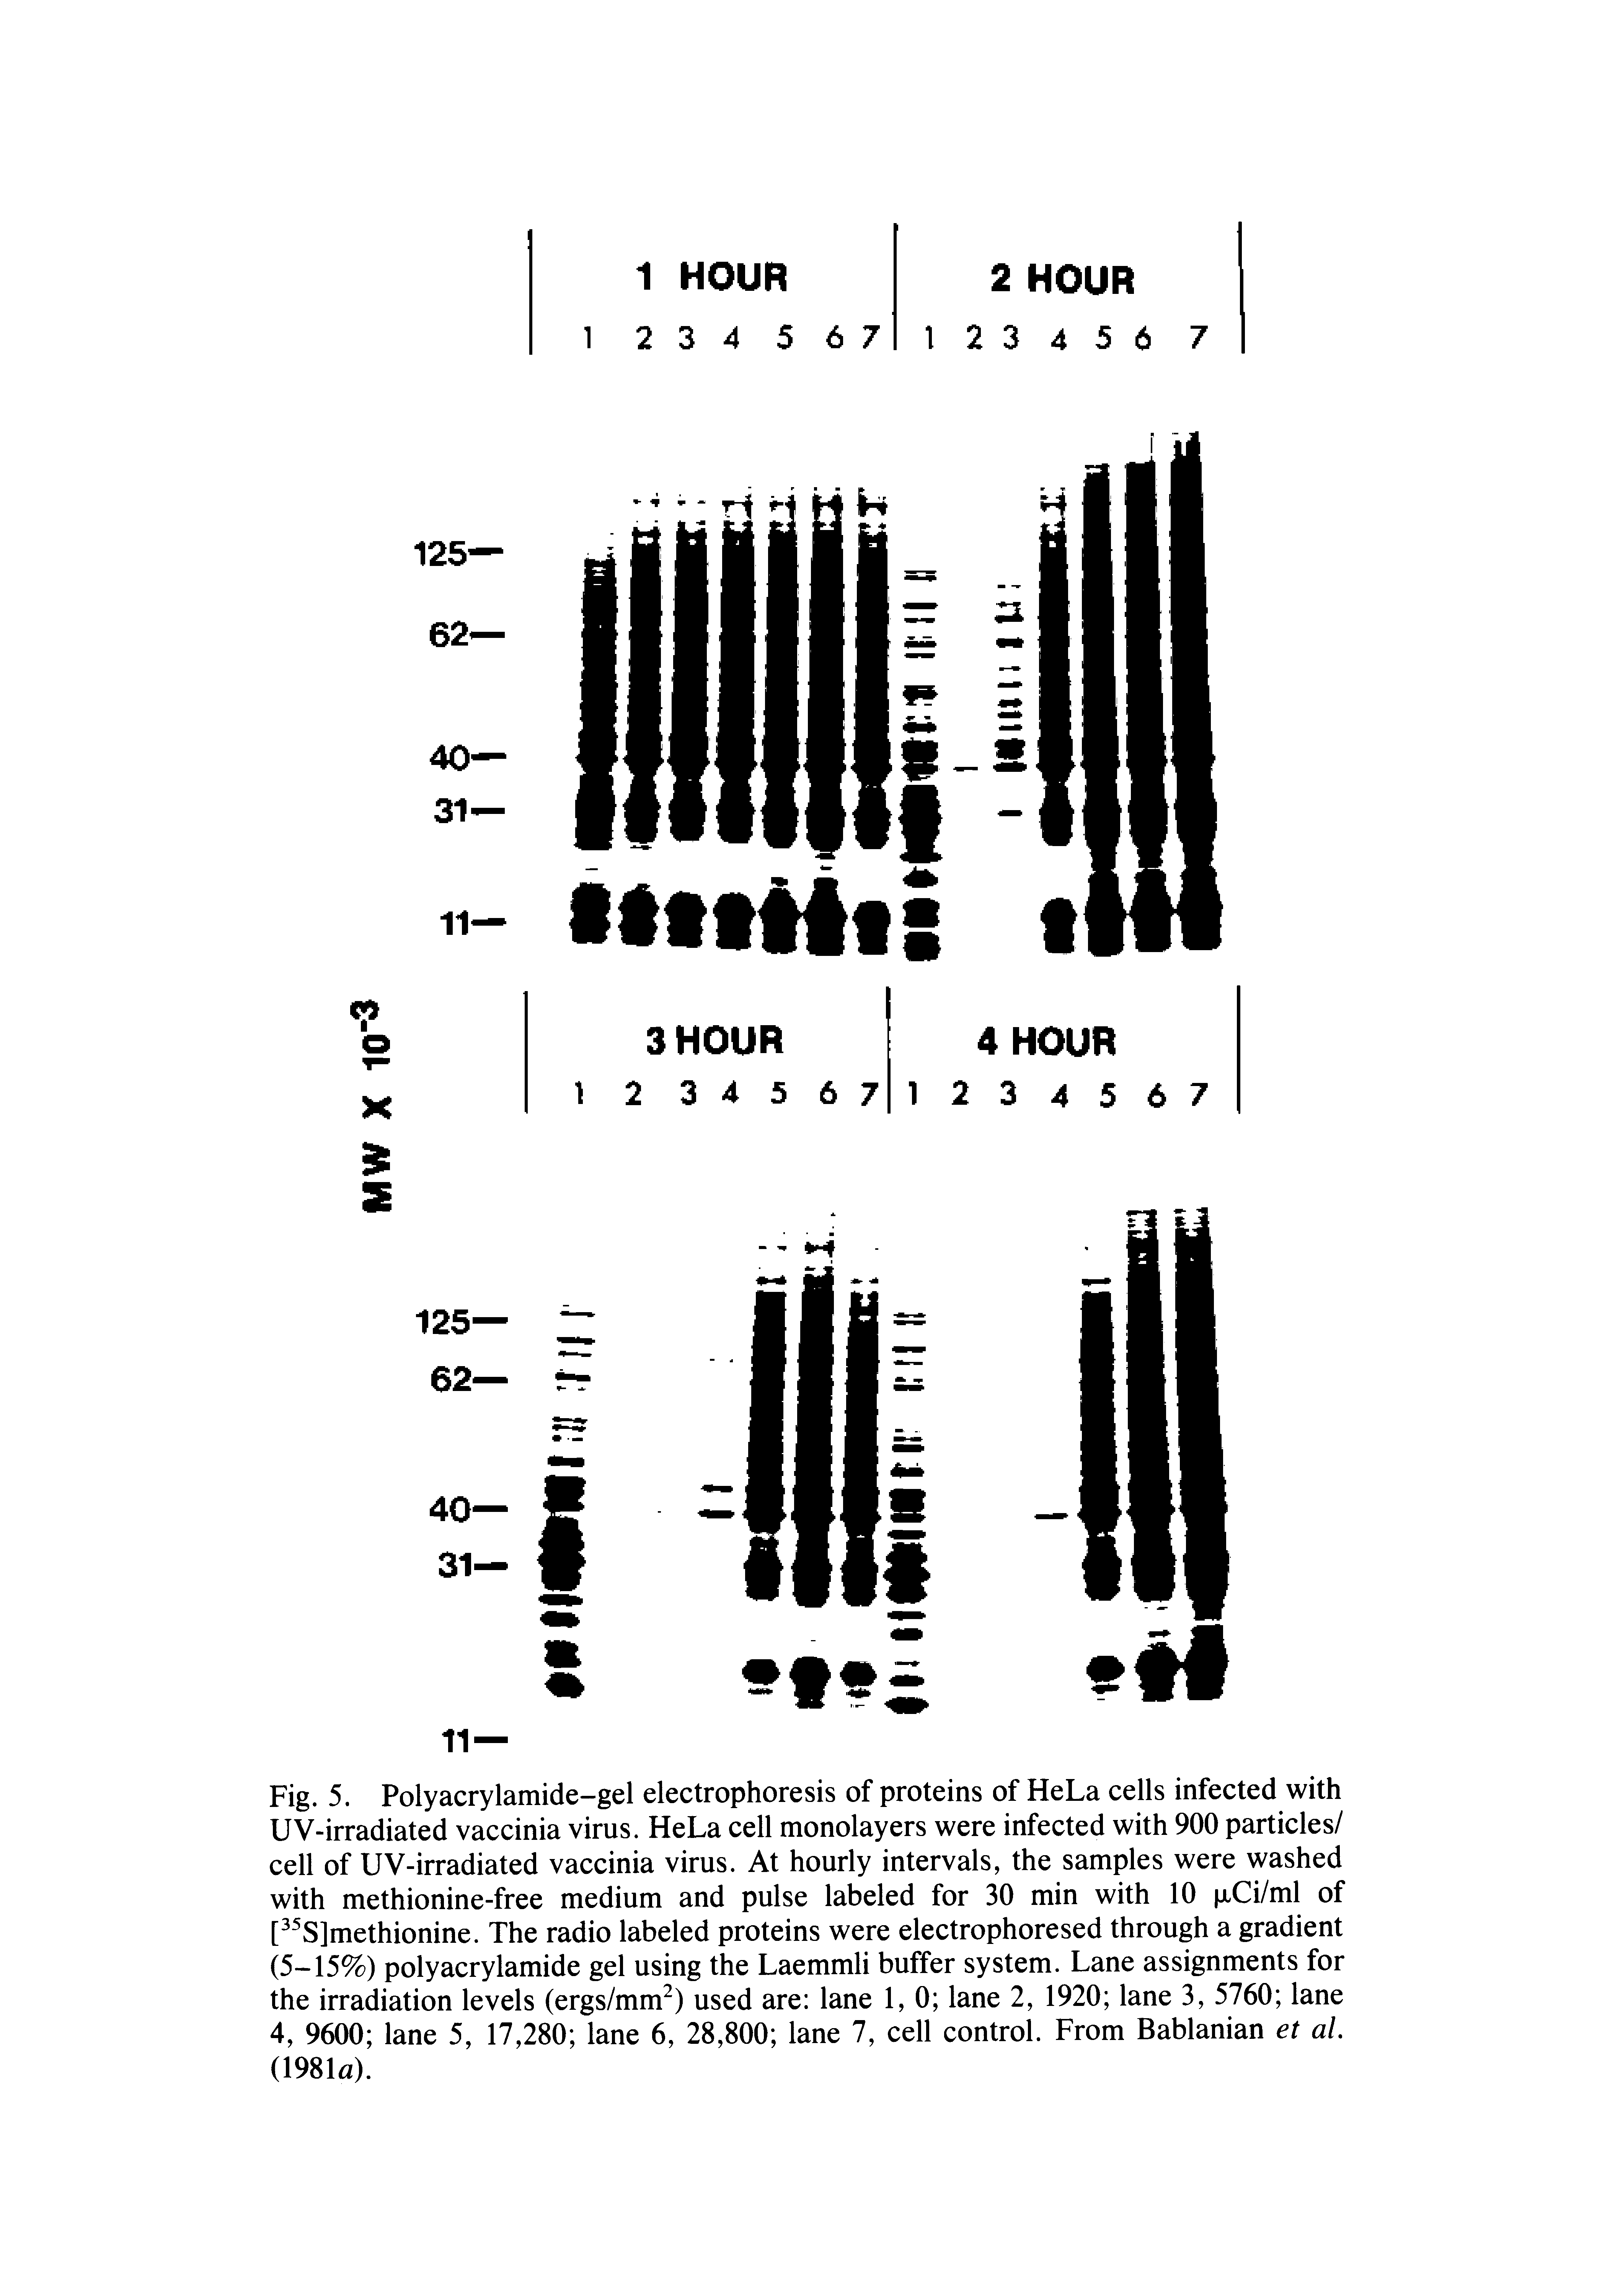 Fig. 5. Polyacrylamide-gel electrophoresis of proteins of HeLa cells infected with UV-irradiated vaccinia virus. HeLa cell monolayers were infected with 900 particles/ cell of UV-irradiated vaccinia virus. At hourly intervals, the samples were washed with methionine-free medium and pulse labeled for 30 min with 10 xCi/ml of [ S]methionine. The radio labeled proteins were electrophoresed through a gradient (5-15%) polyacrylamide gel using the Laemmli buffer system. Lane assignments for the irradiation levels (ergs/mm ) used are lane 1, 0 lane 2, 1920 lane 3, 5760 lane 4, 9600 lane 5, 17,280 lane 6, 28,800 lane 7, cell control. From Bablanian et al. imia).